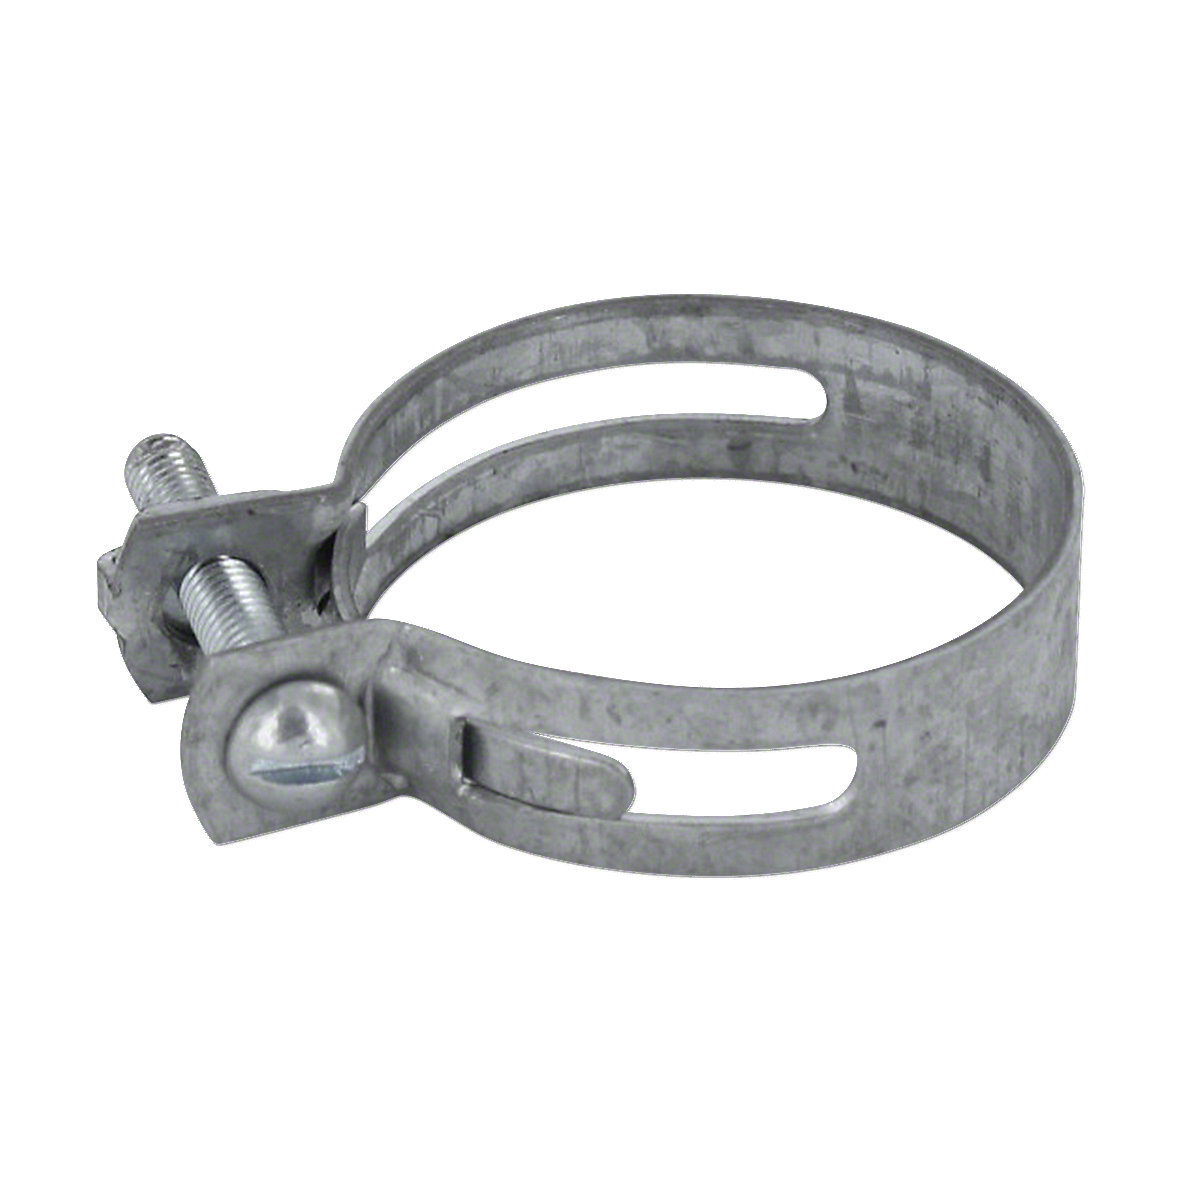 Upper Or Lower Radiator Hose Clamp For Allis Chalmers: B, C, CA, D10, D12, D14, IB, RC.